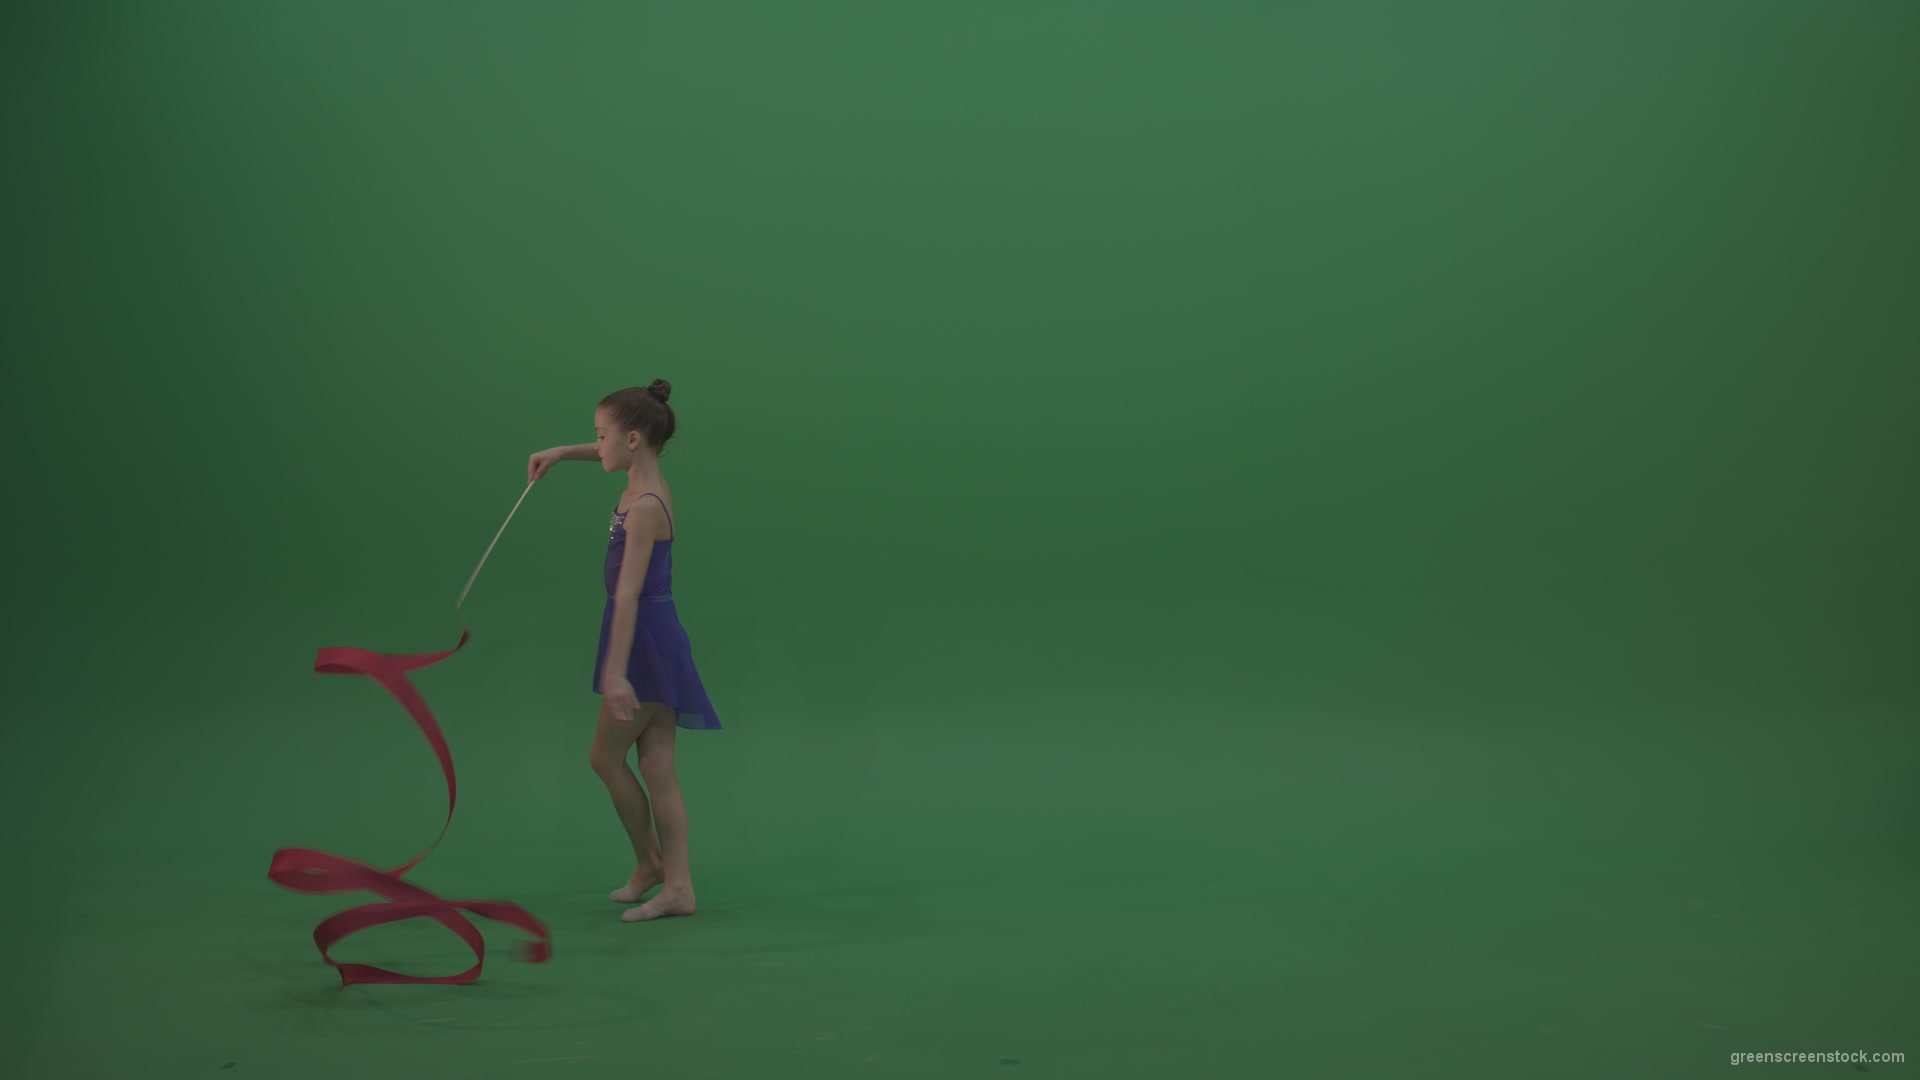 Young_Female_Acrobat_Gymnast_Performing_Acro_Dance_Using_Red_Long_Ribbon_On_Green_Screen_Wall_Chroma_Key_Background_005 Green Screen Stock